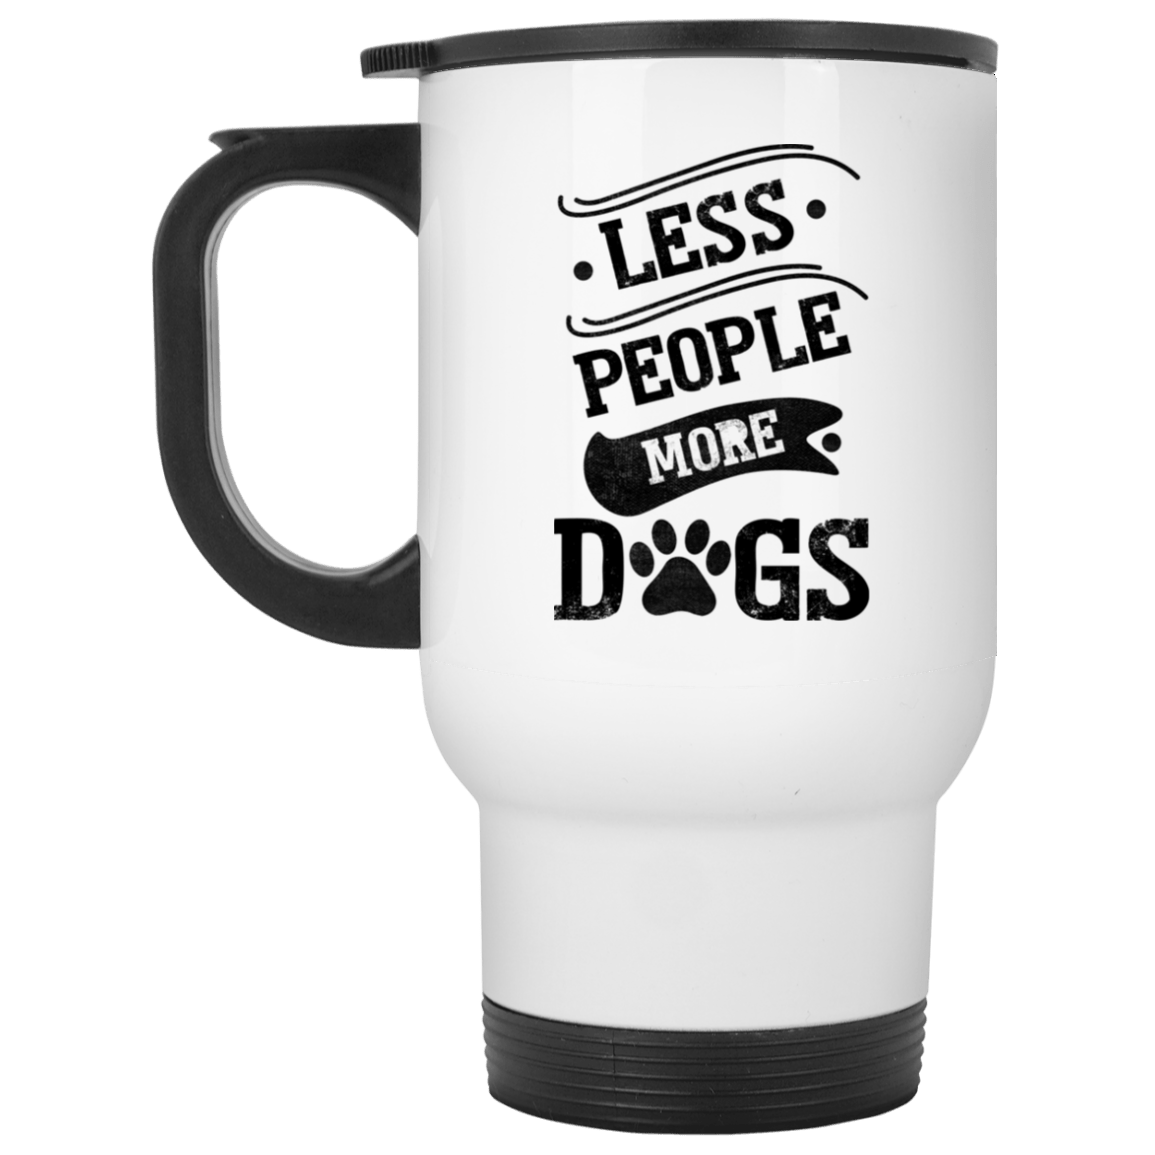 Less People More Dogs - Mugs.